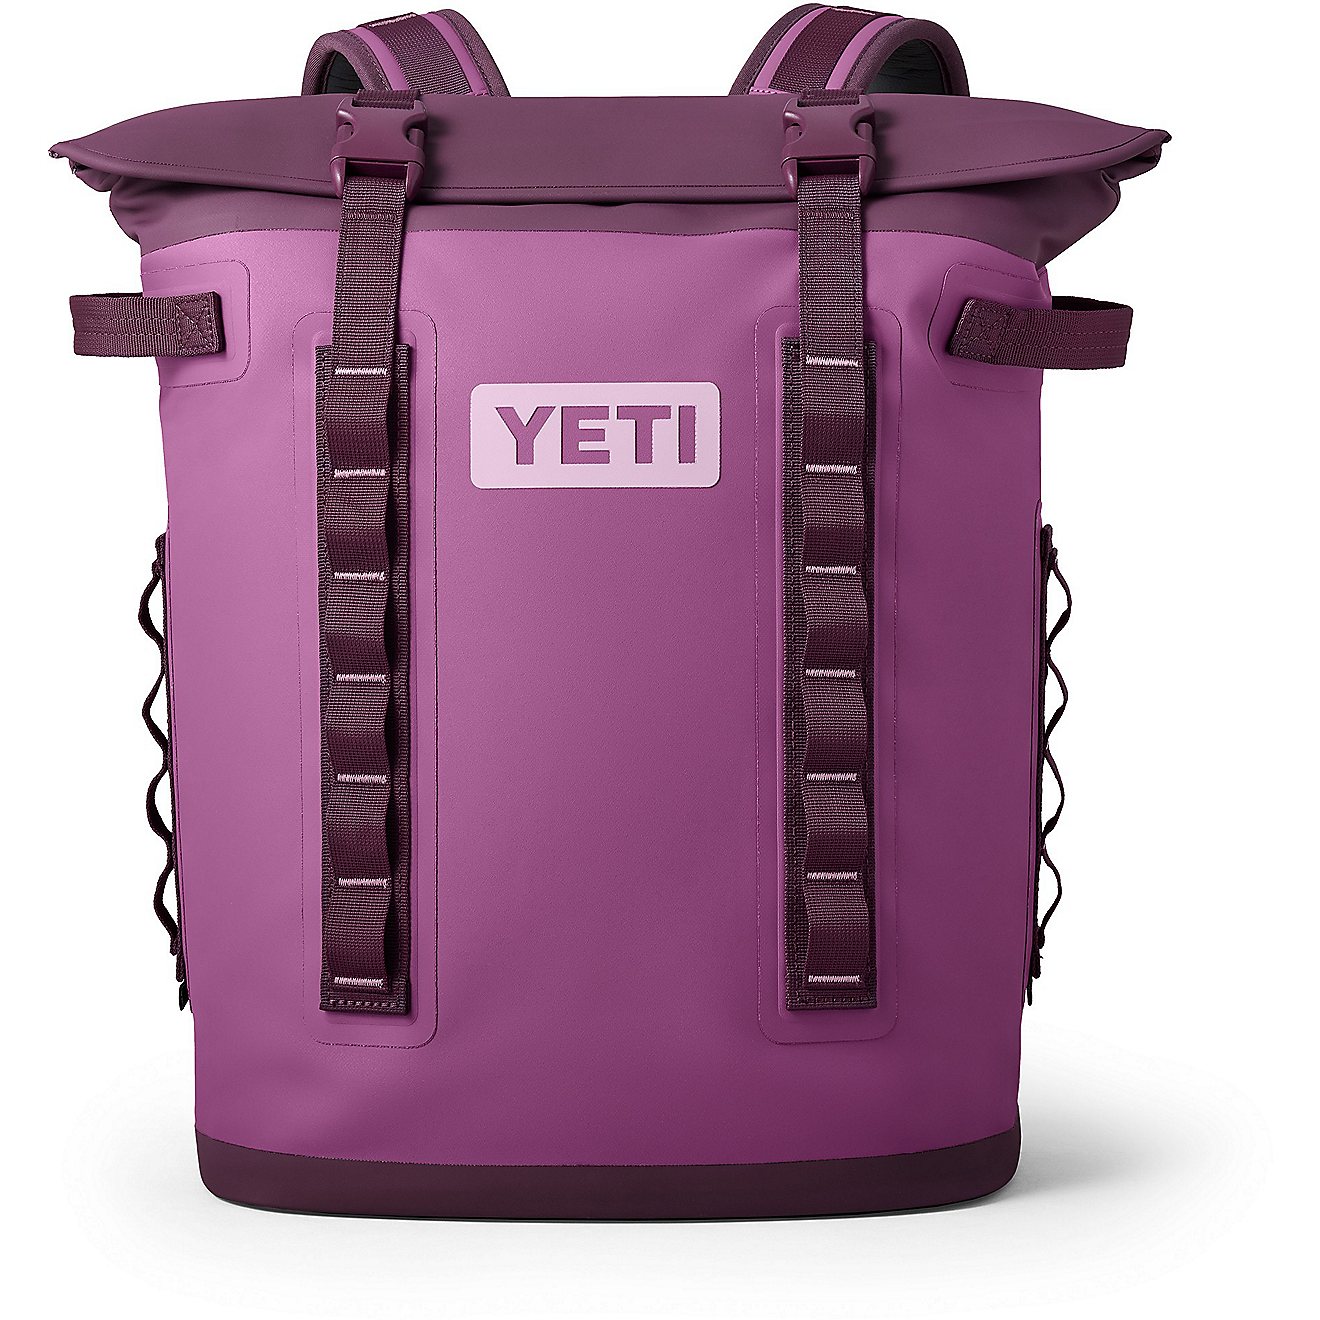 YETI Hopper M20 Backpack Cooler                                                                                                  - view number 1